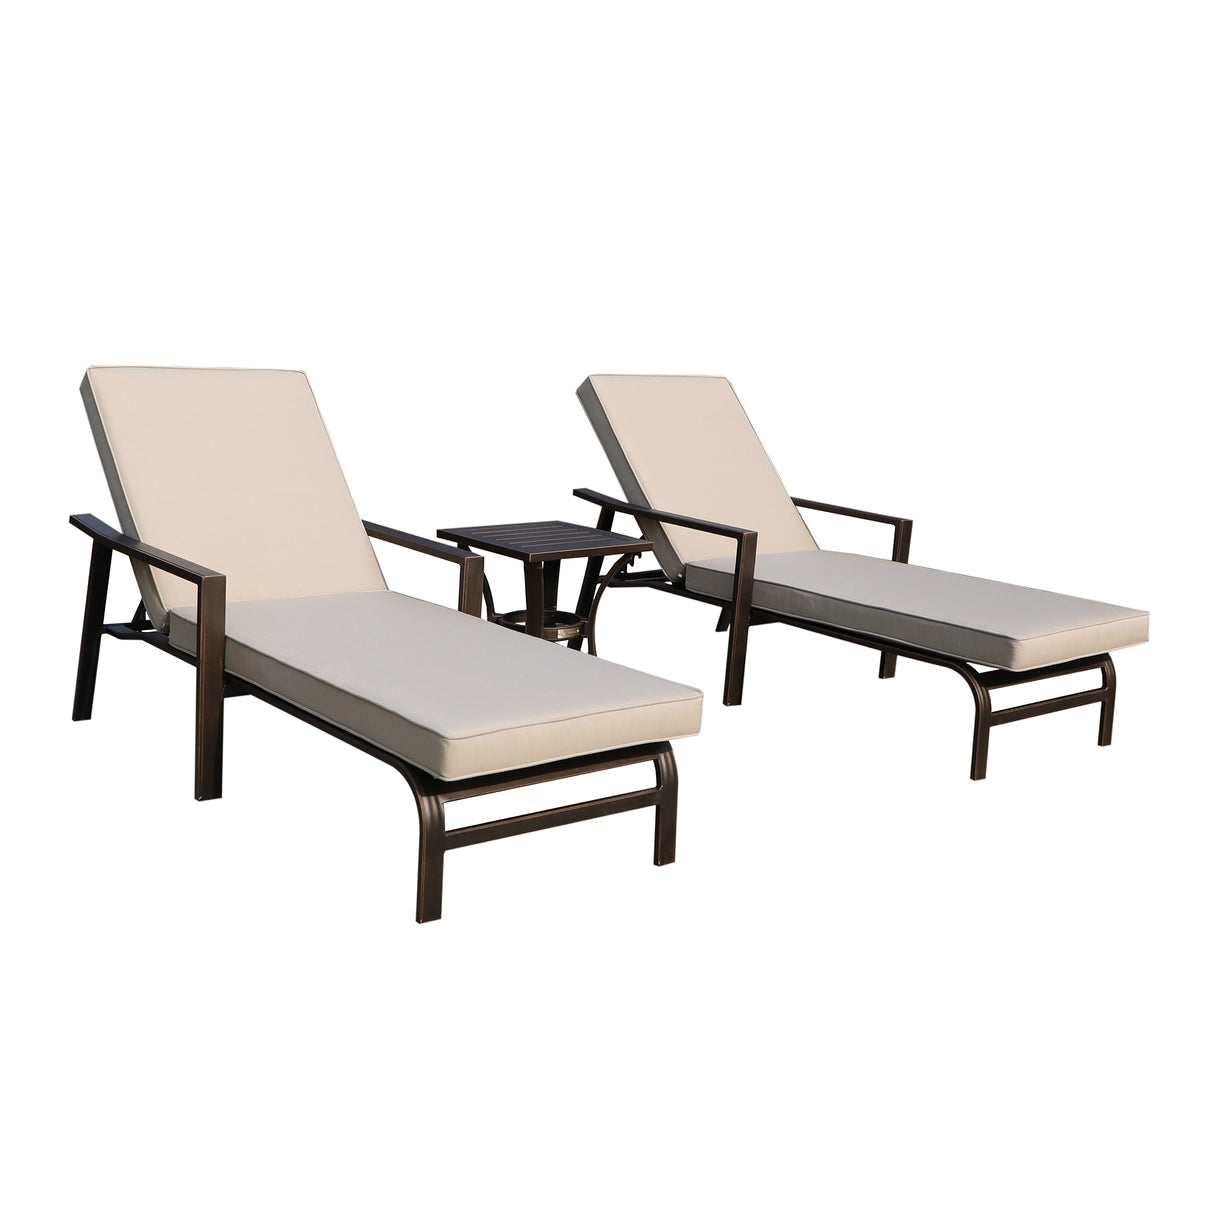 78.93" Long Reclining Chaise Lounge Set with Taupe Cushions, Liberty Bronze